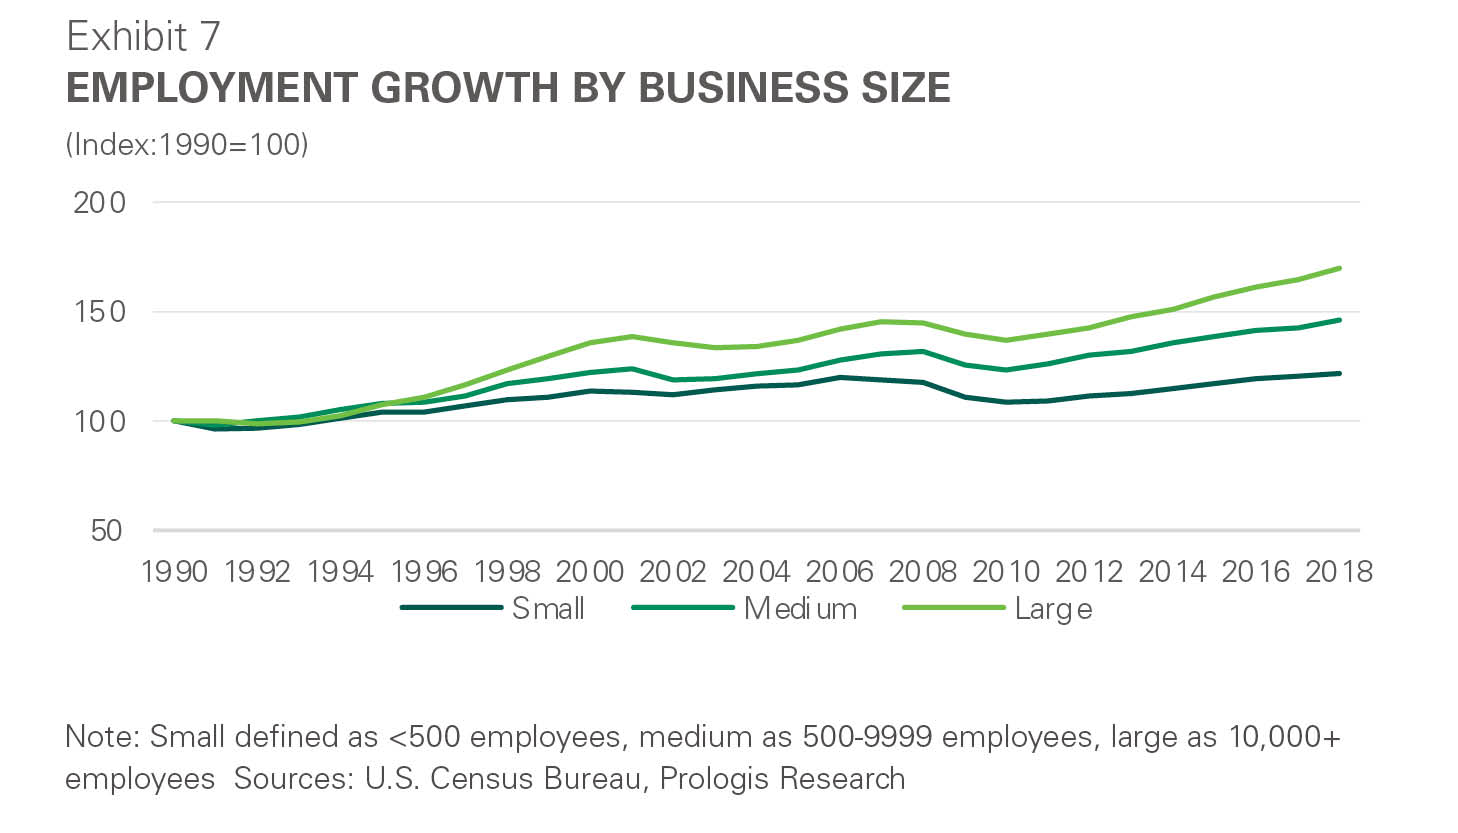 Exhibit 7: Employment growth by business size